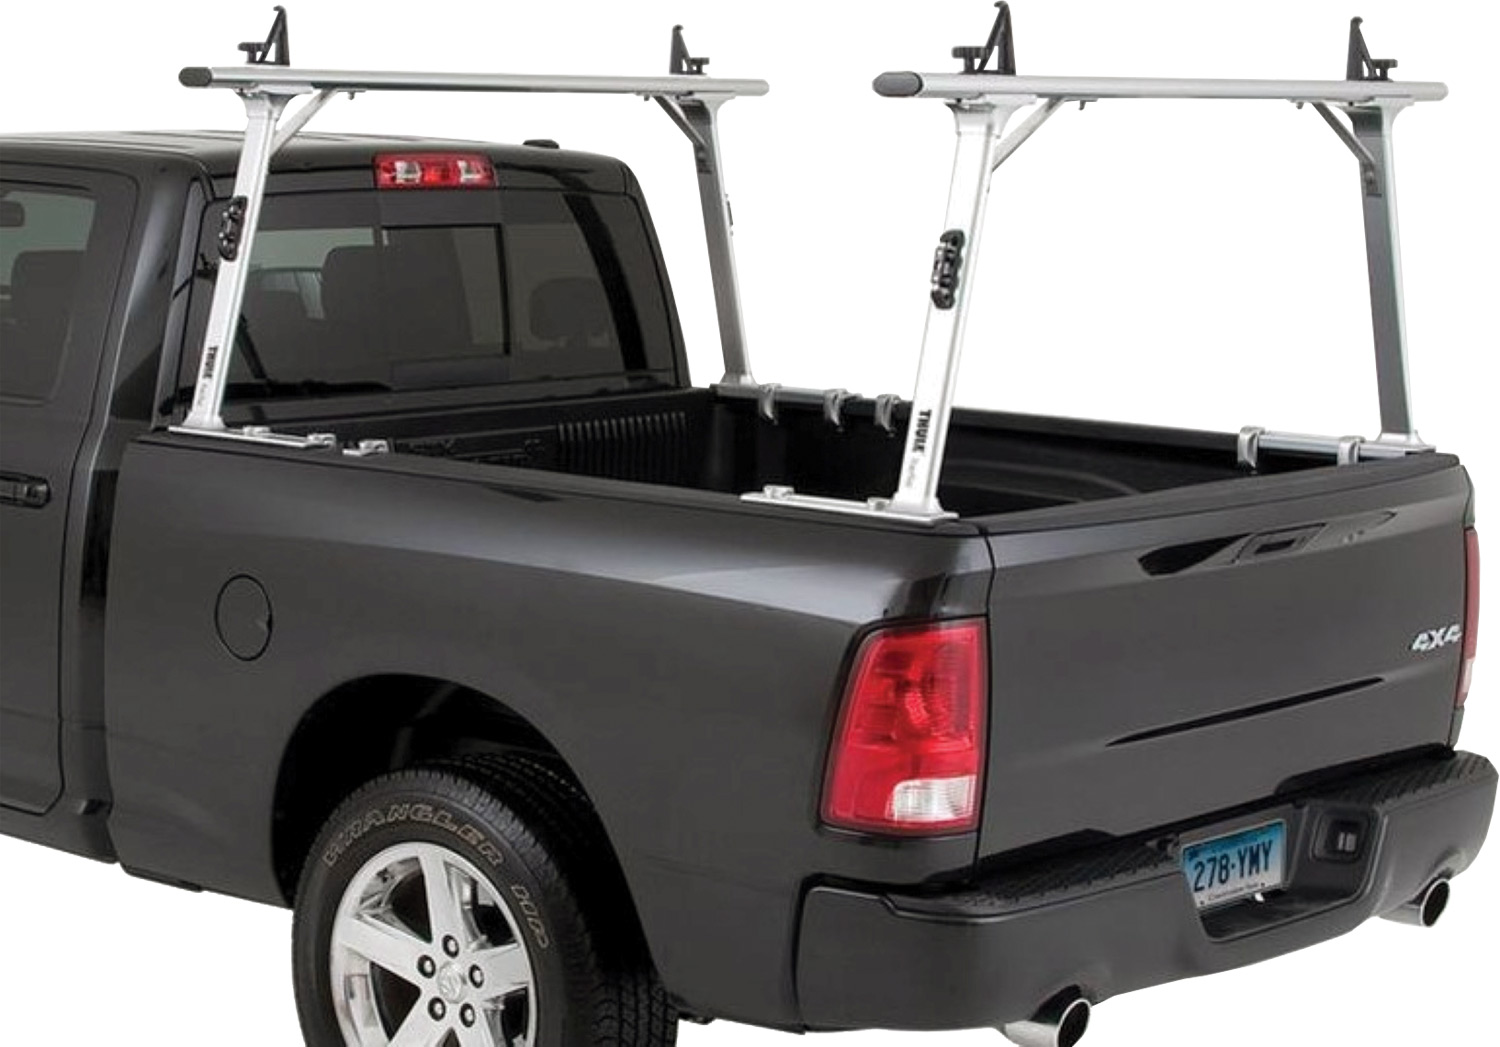 three-quarter rear view of the TracRac Pro 2 Truck Rack installed on truck